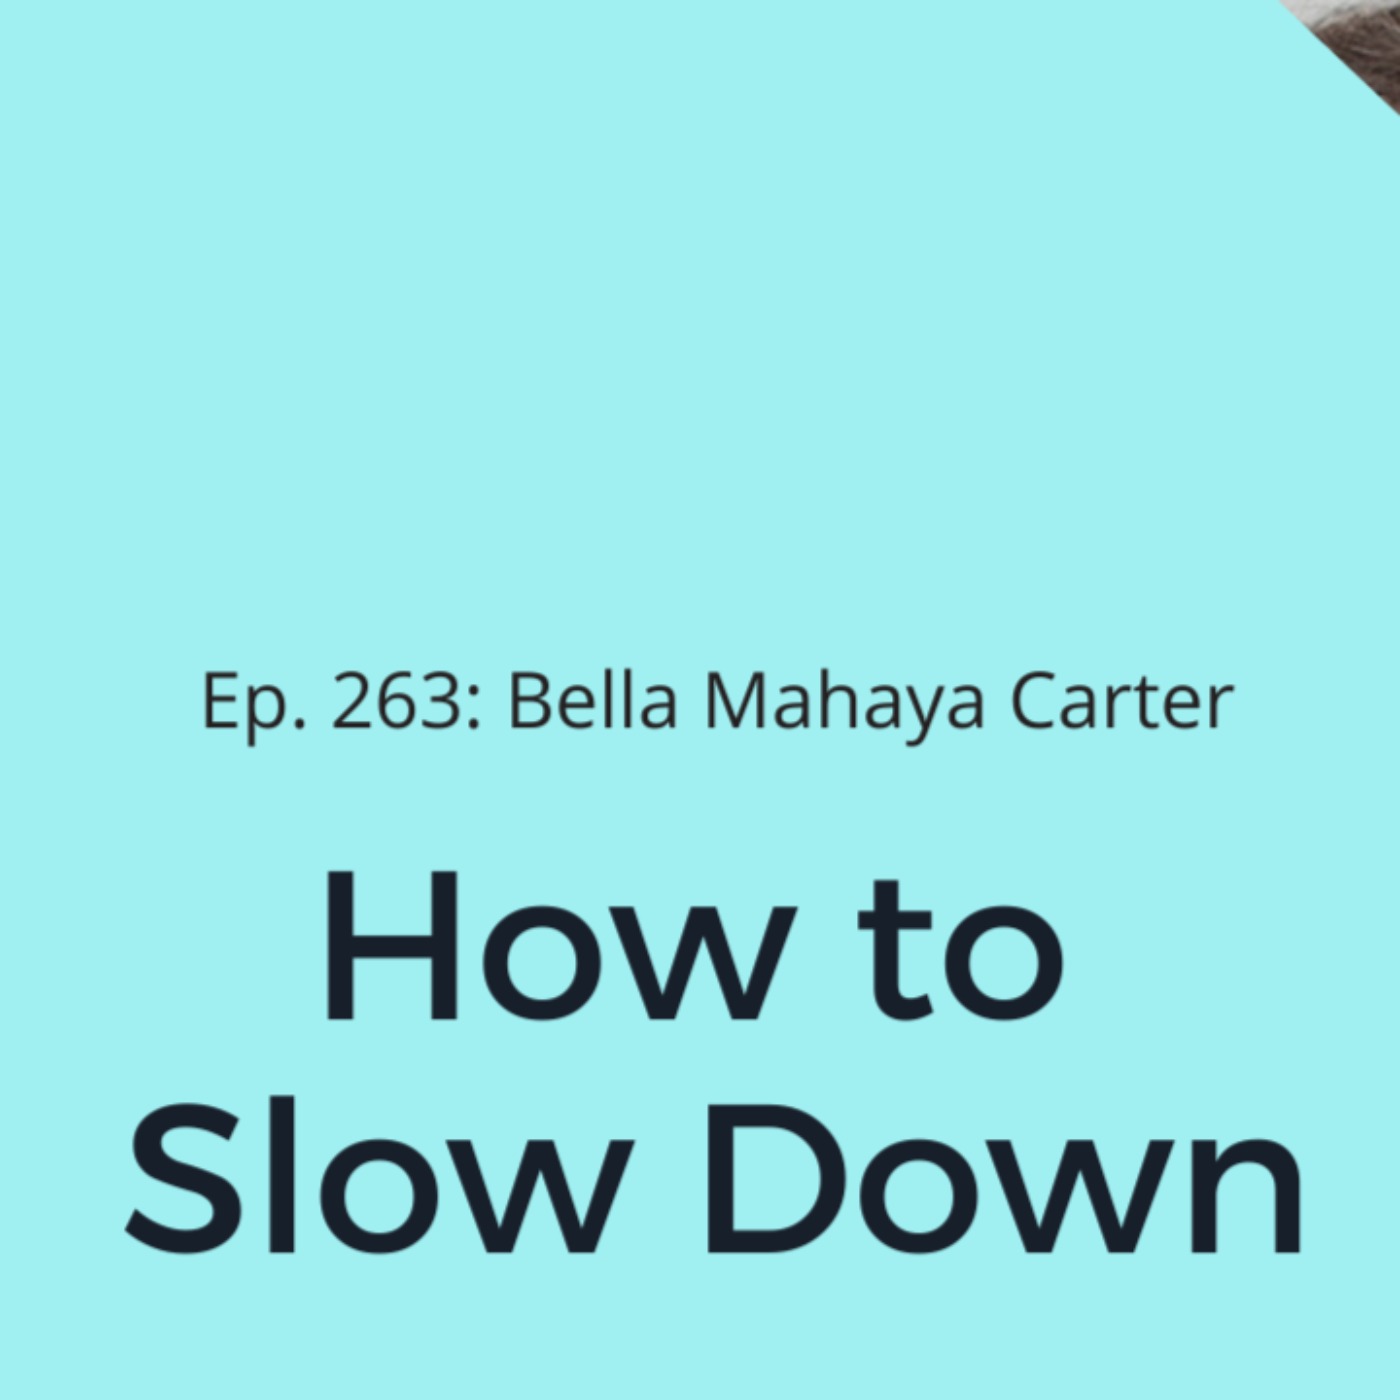 Ep. 263: Bella Mahaya Carter on How to Slow Down